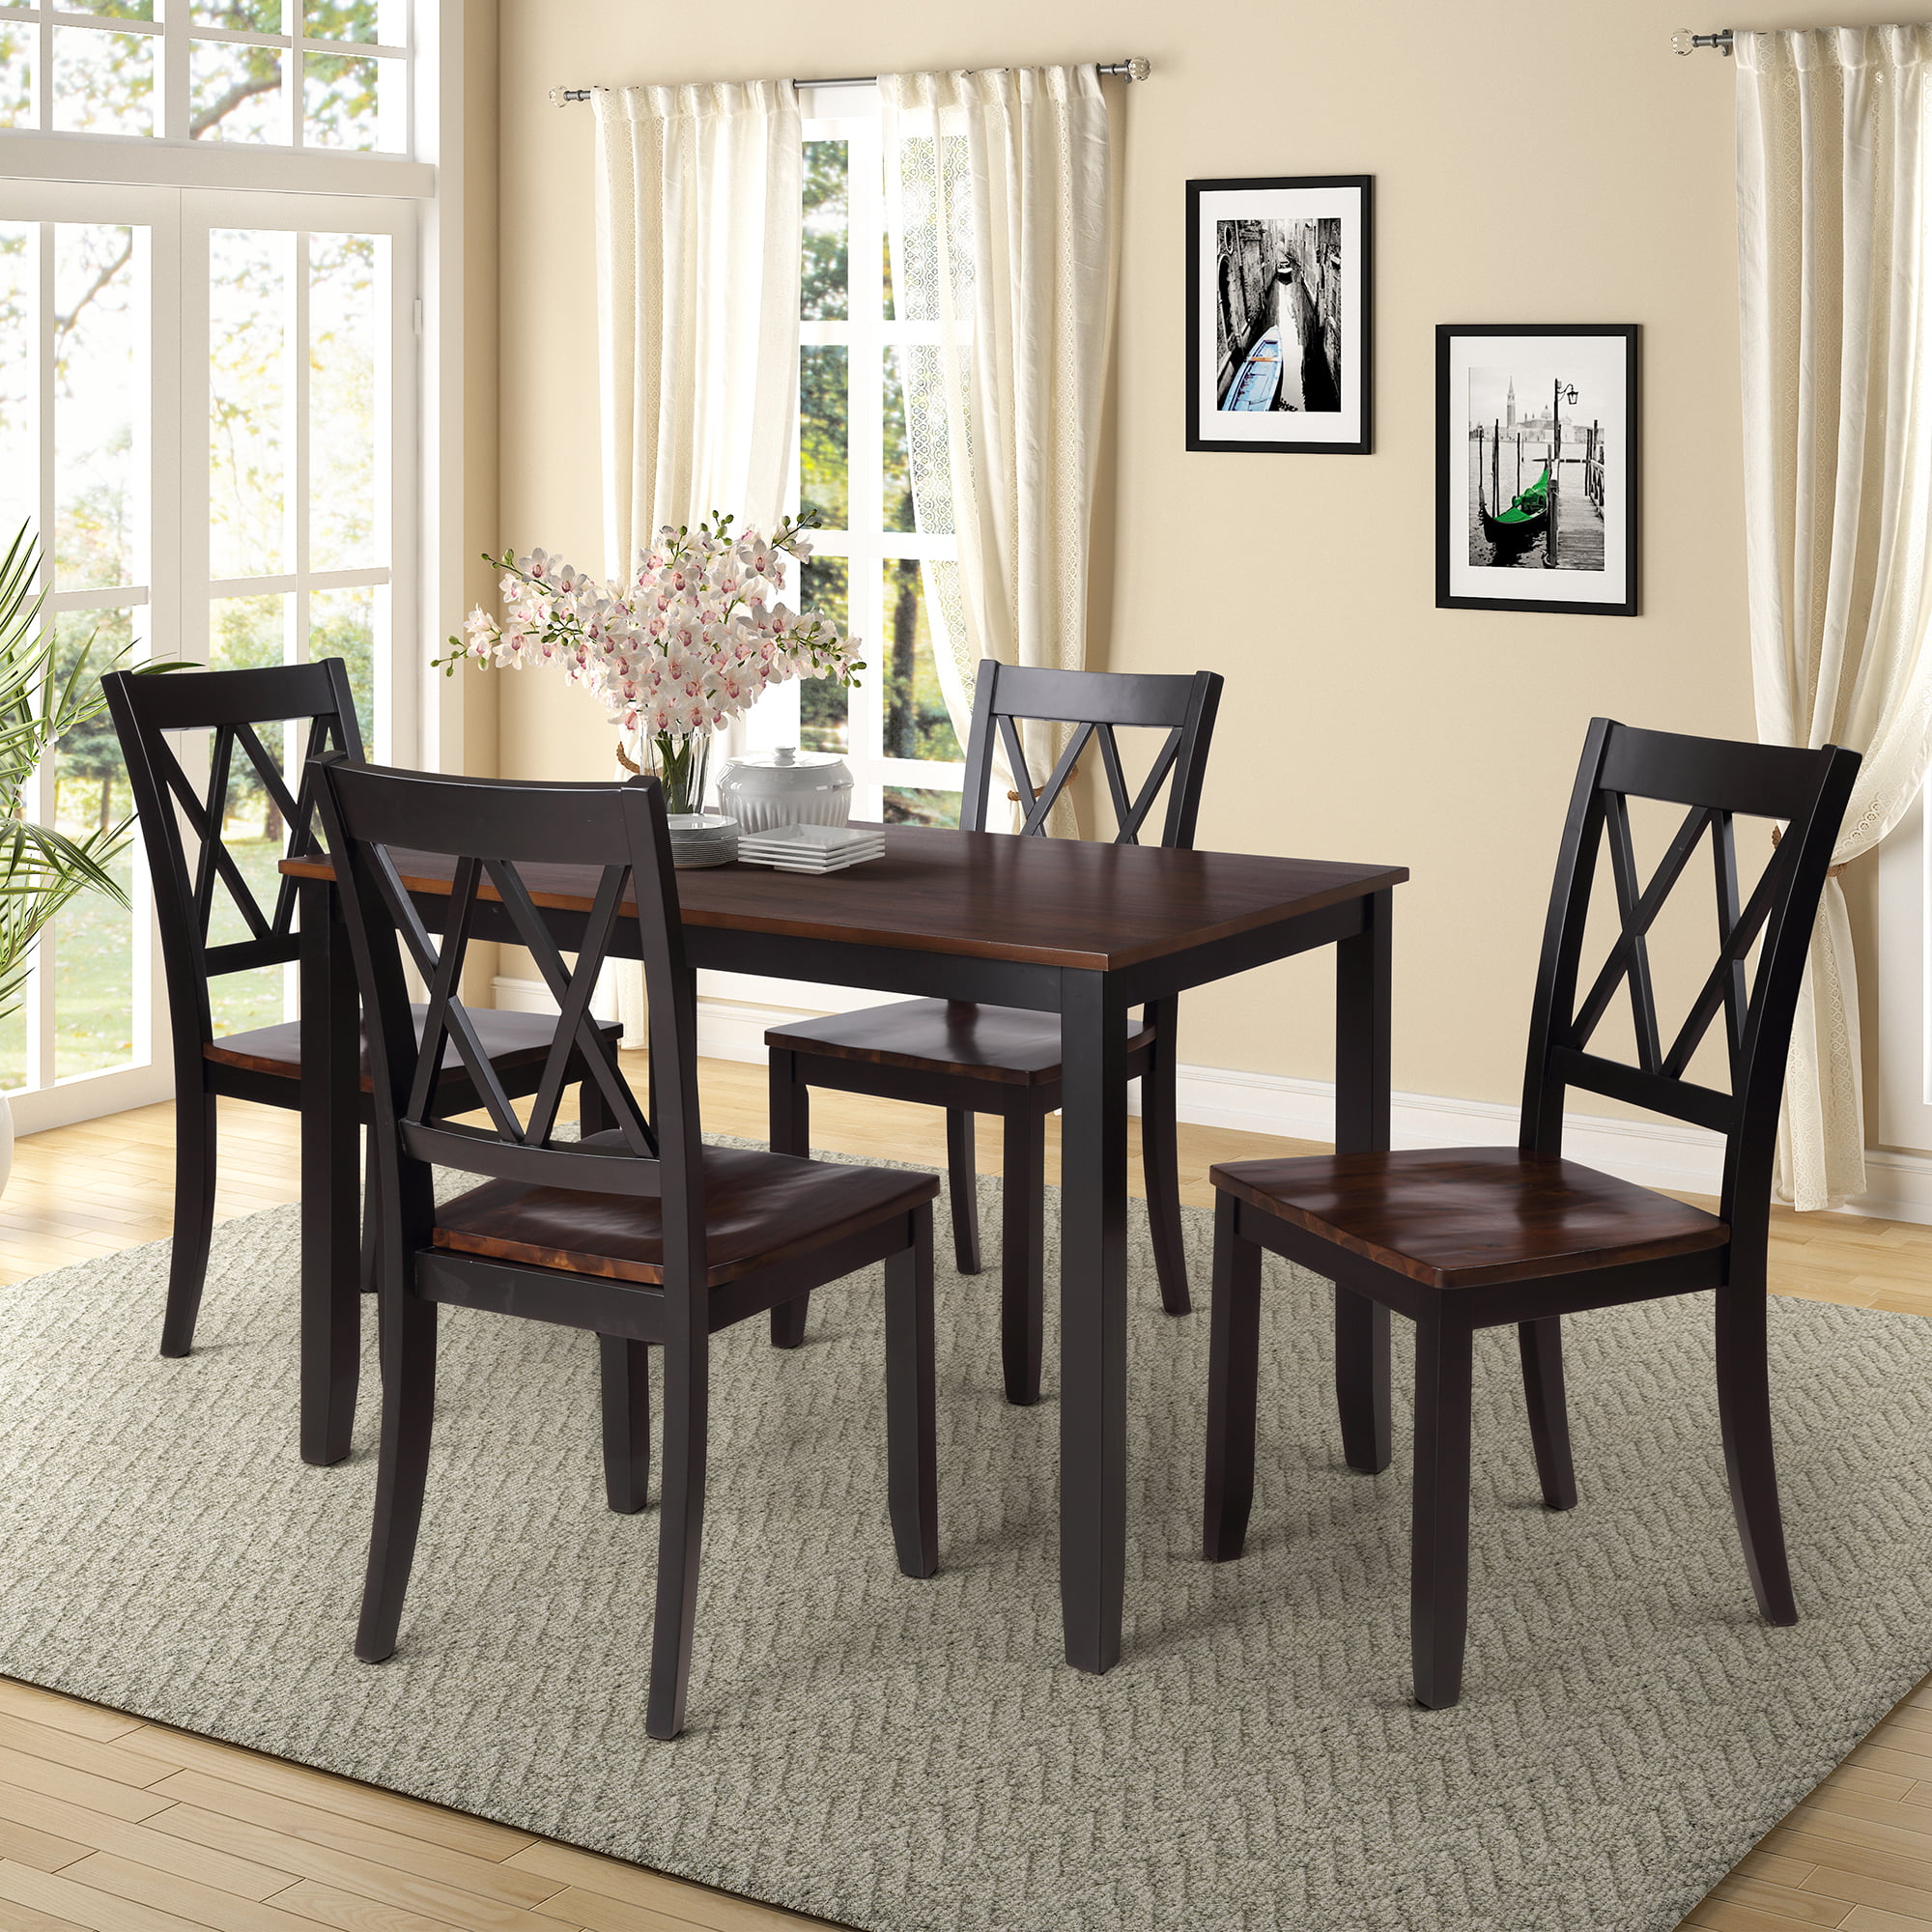 wooden dining room furniture